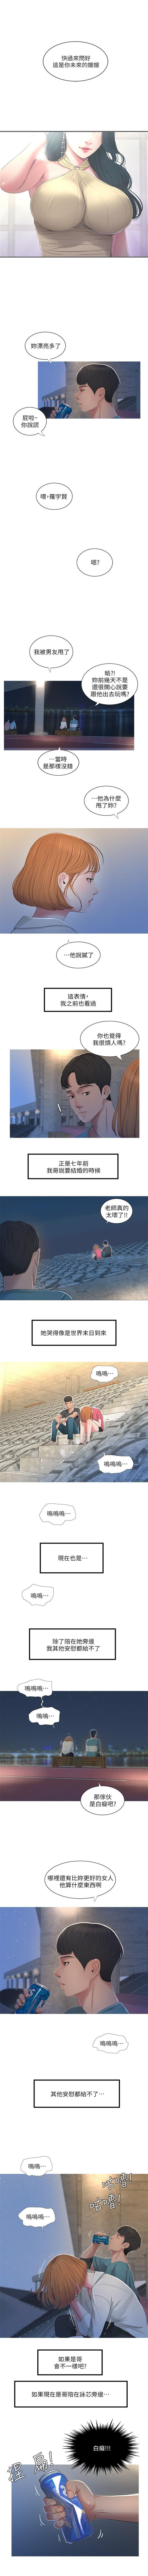 Gay Toys 親家四姊妹 1-26 官方中文（連載中） Doggystyle - Page 6